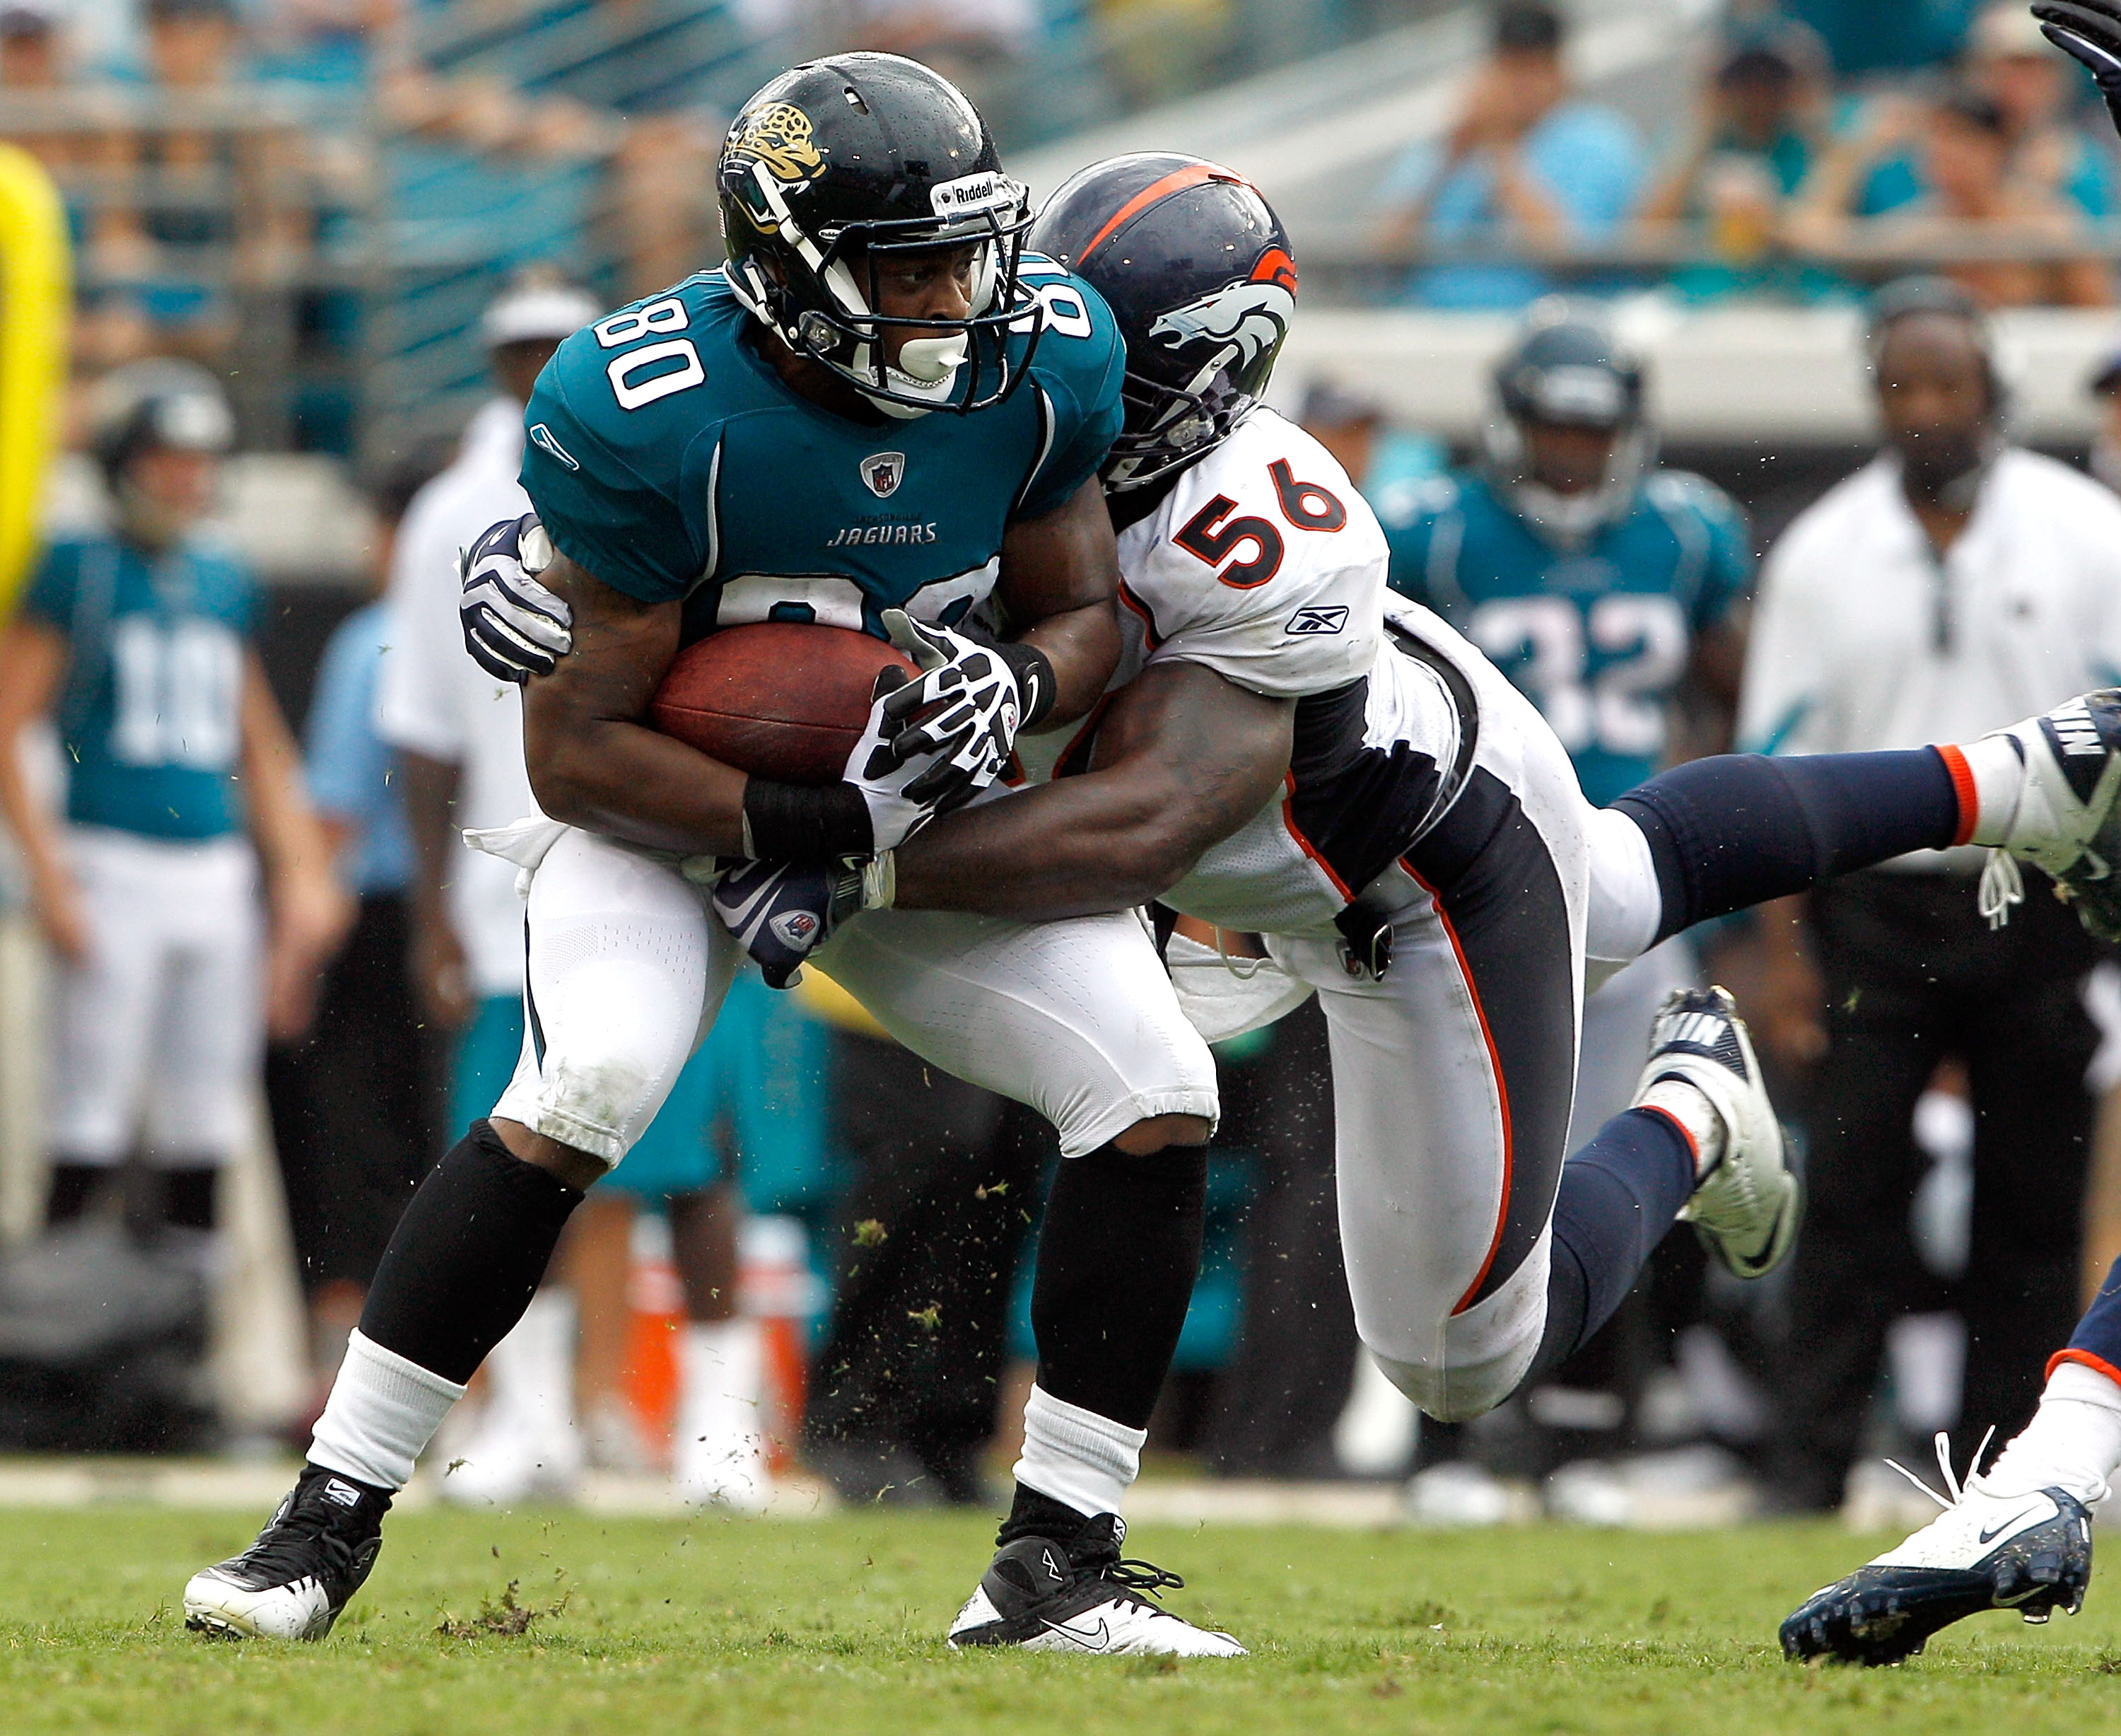 JACKSONVILLE, FL - SEPTEMBER 12:  Robert Ayers #56 of the Denver Broncos attempts to tackle Mike Thomas #80 of the Jacksonville Jaguars during the NFL season opener game at EverBank Field on September 12, 2010 in Jacksonville, Florida.  (Photo by Sam Gree